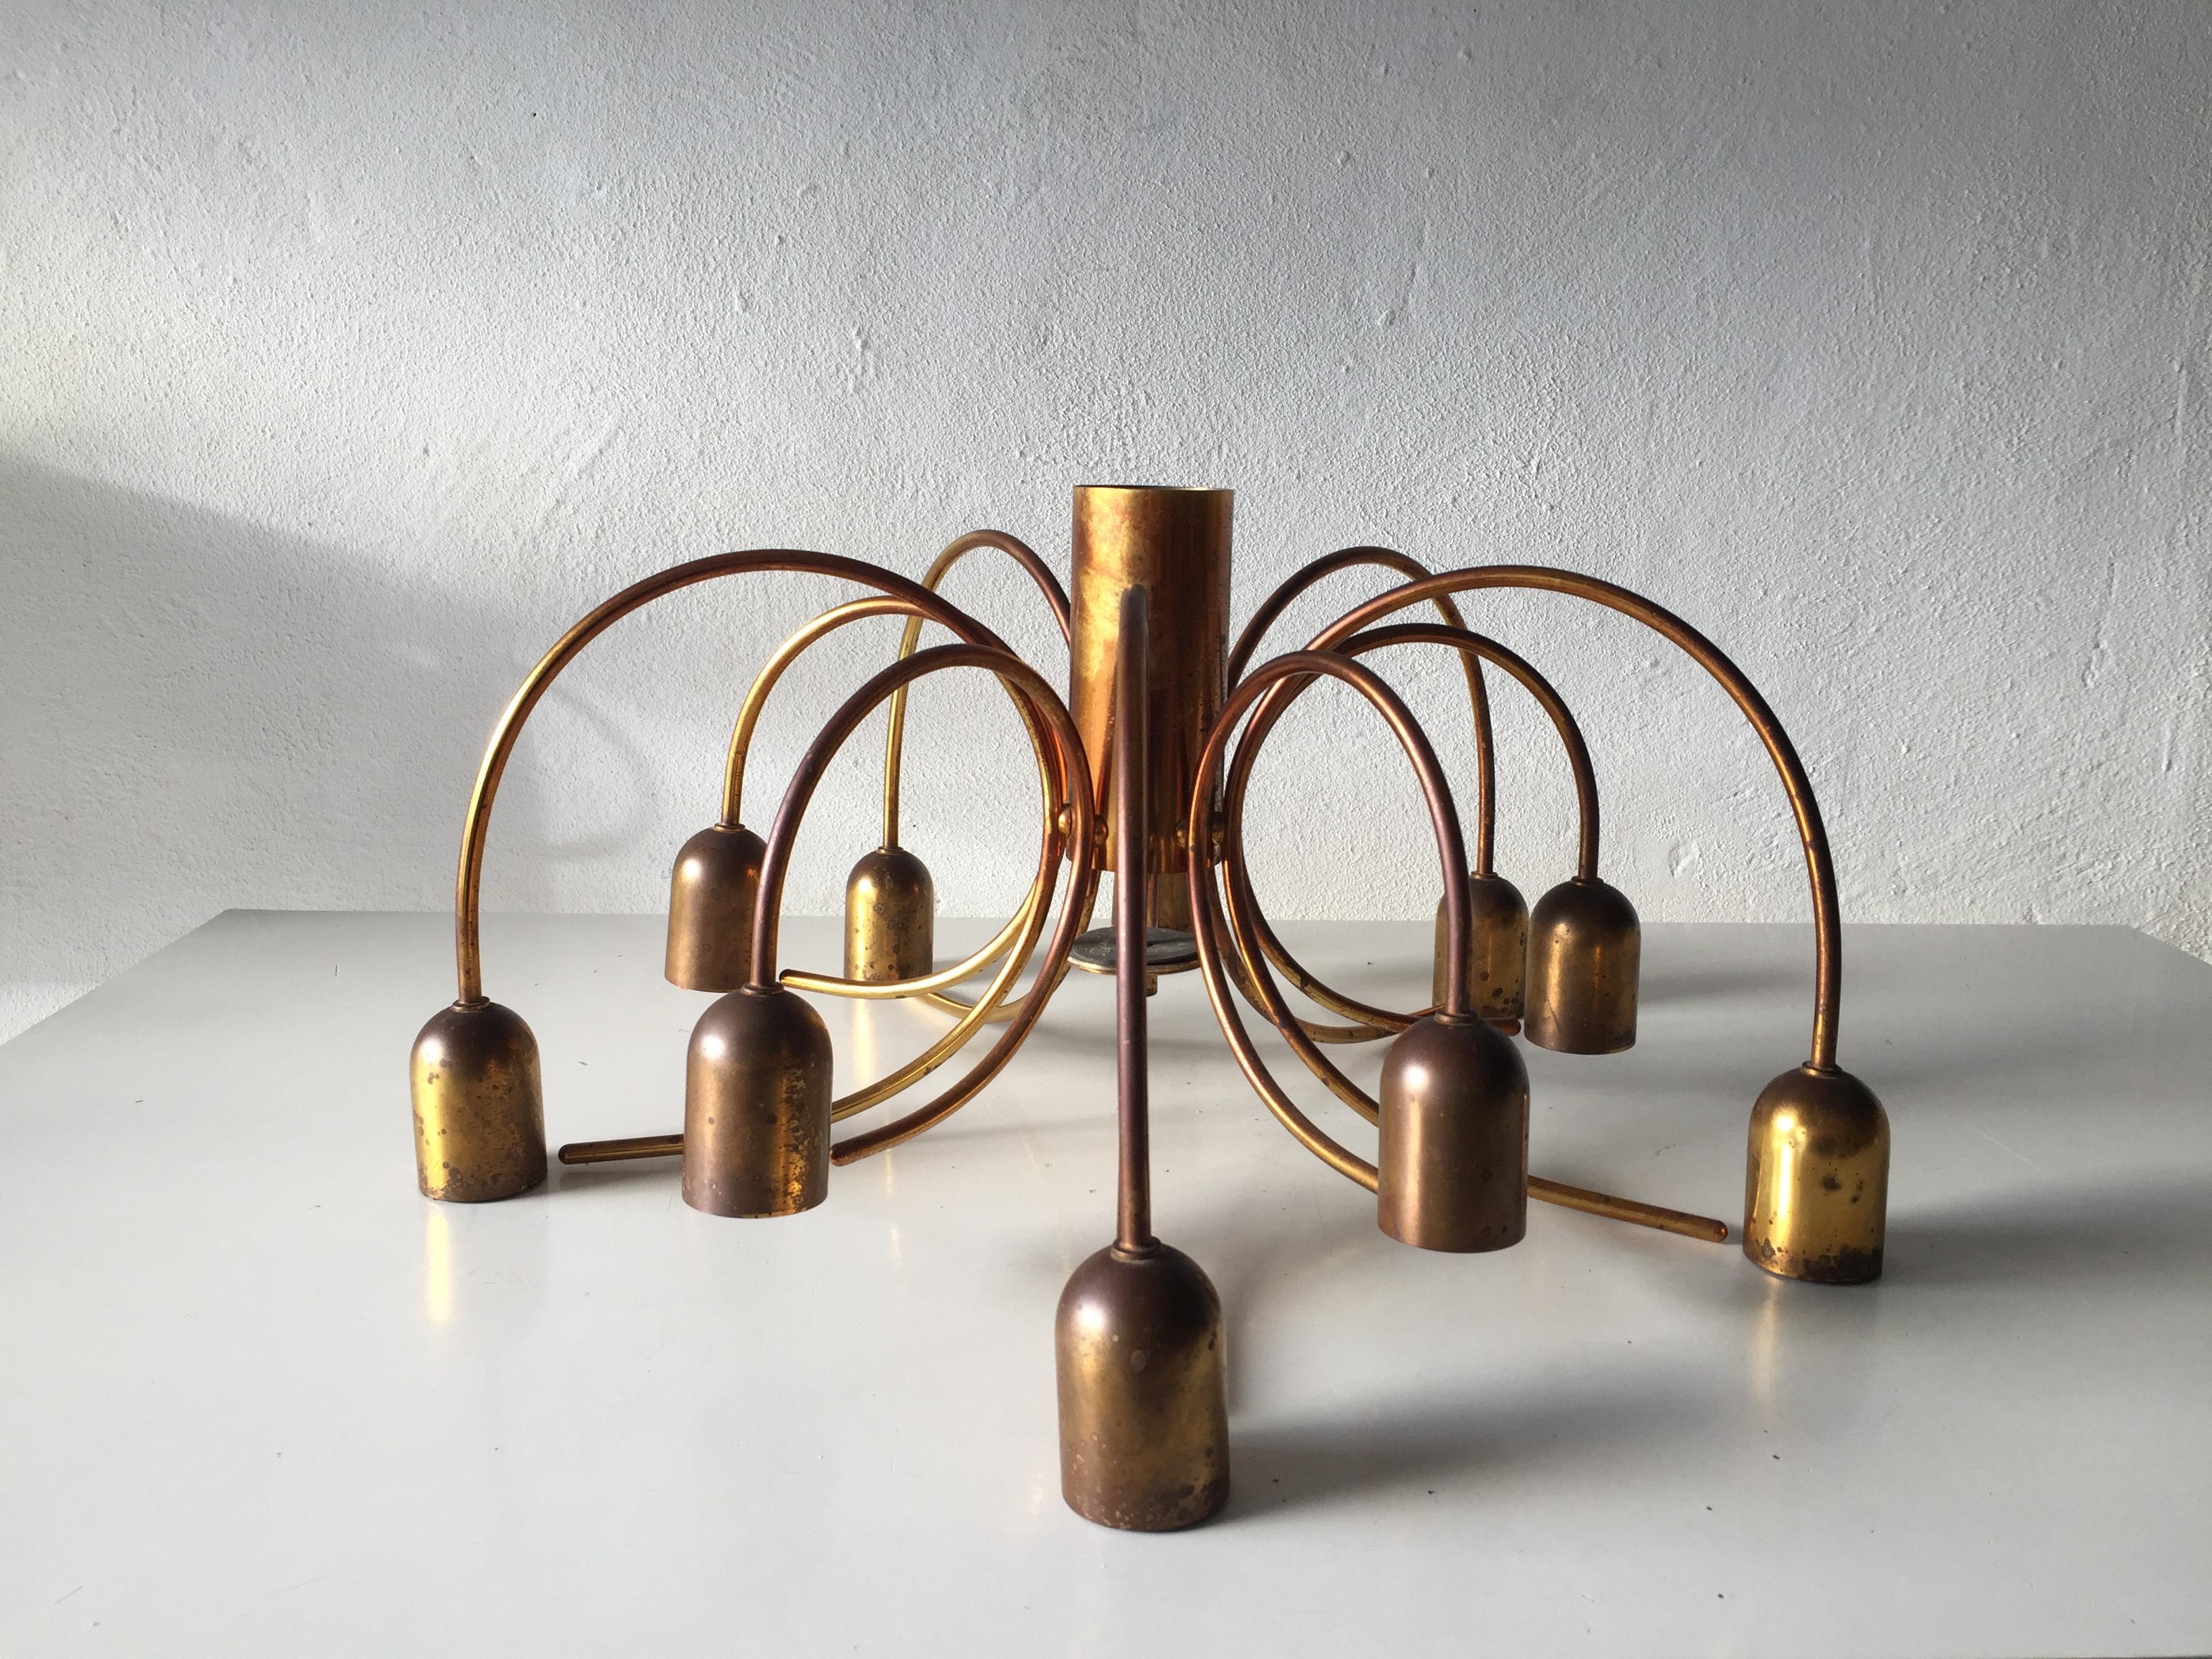 Rare 10 Arc Shaped Arms Full Brass Chandelier by Cosack Leuchten, 1970s Germany For Sale 5